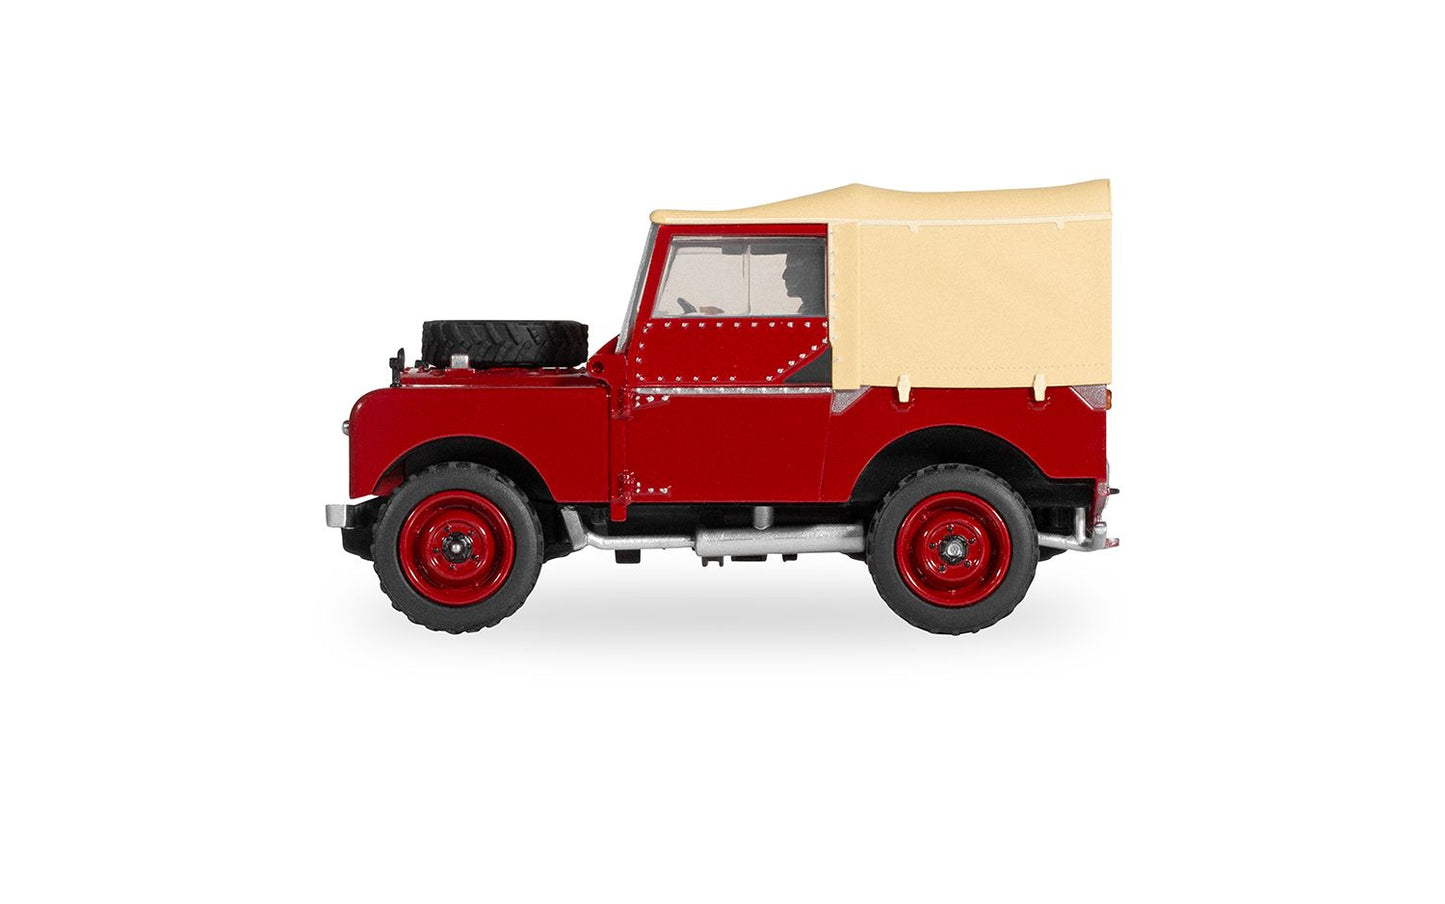 Scalextric Land Rover Series 1 - Poppy Red (C4493)